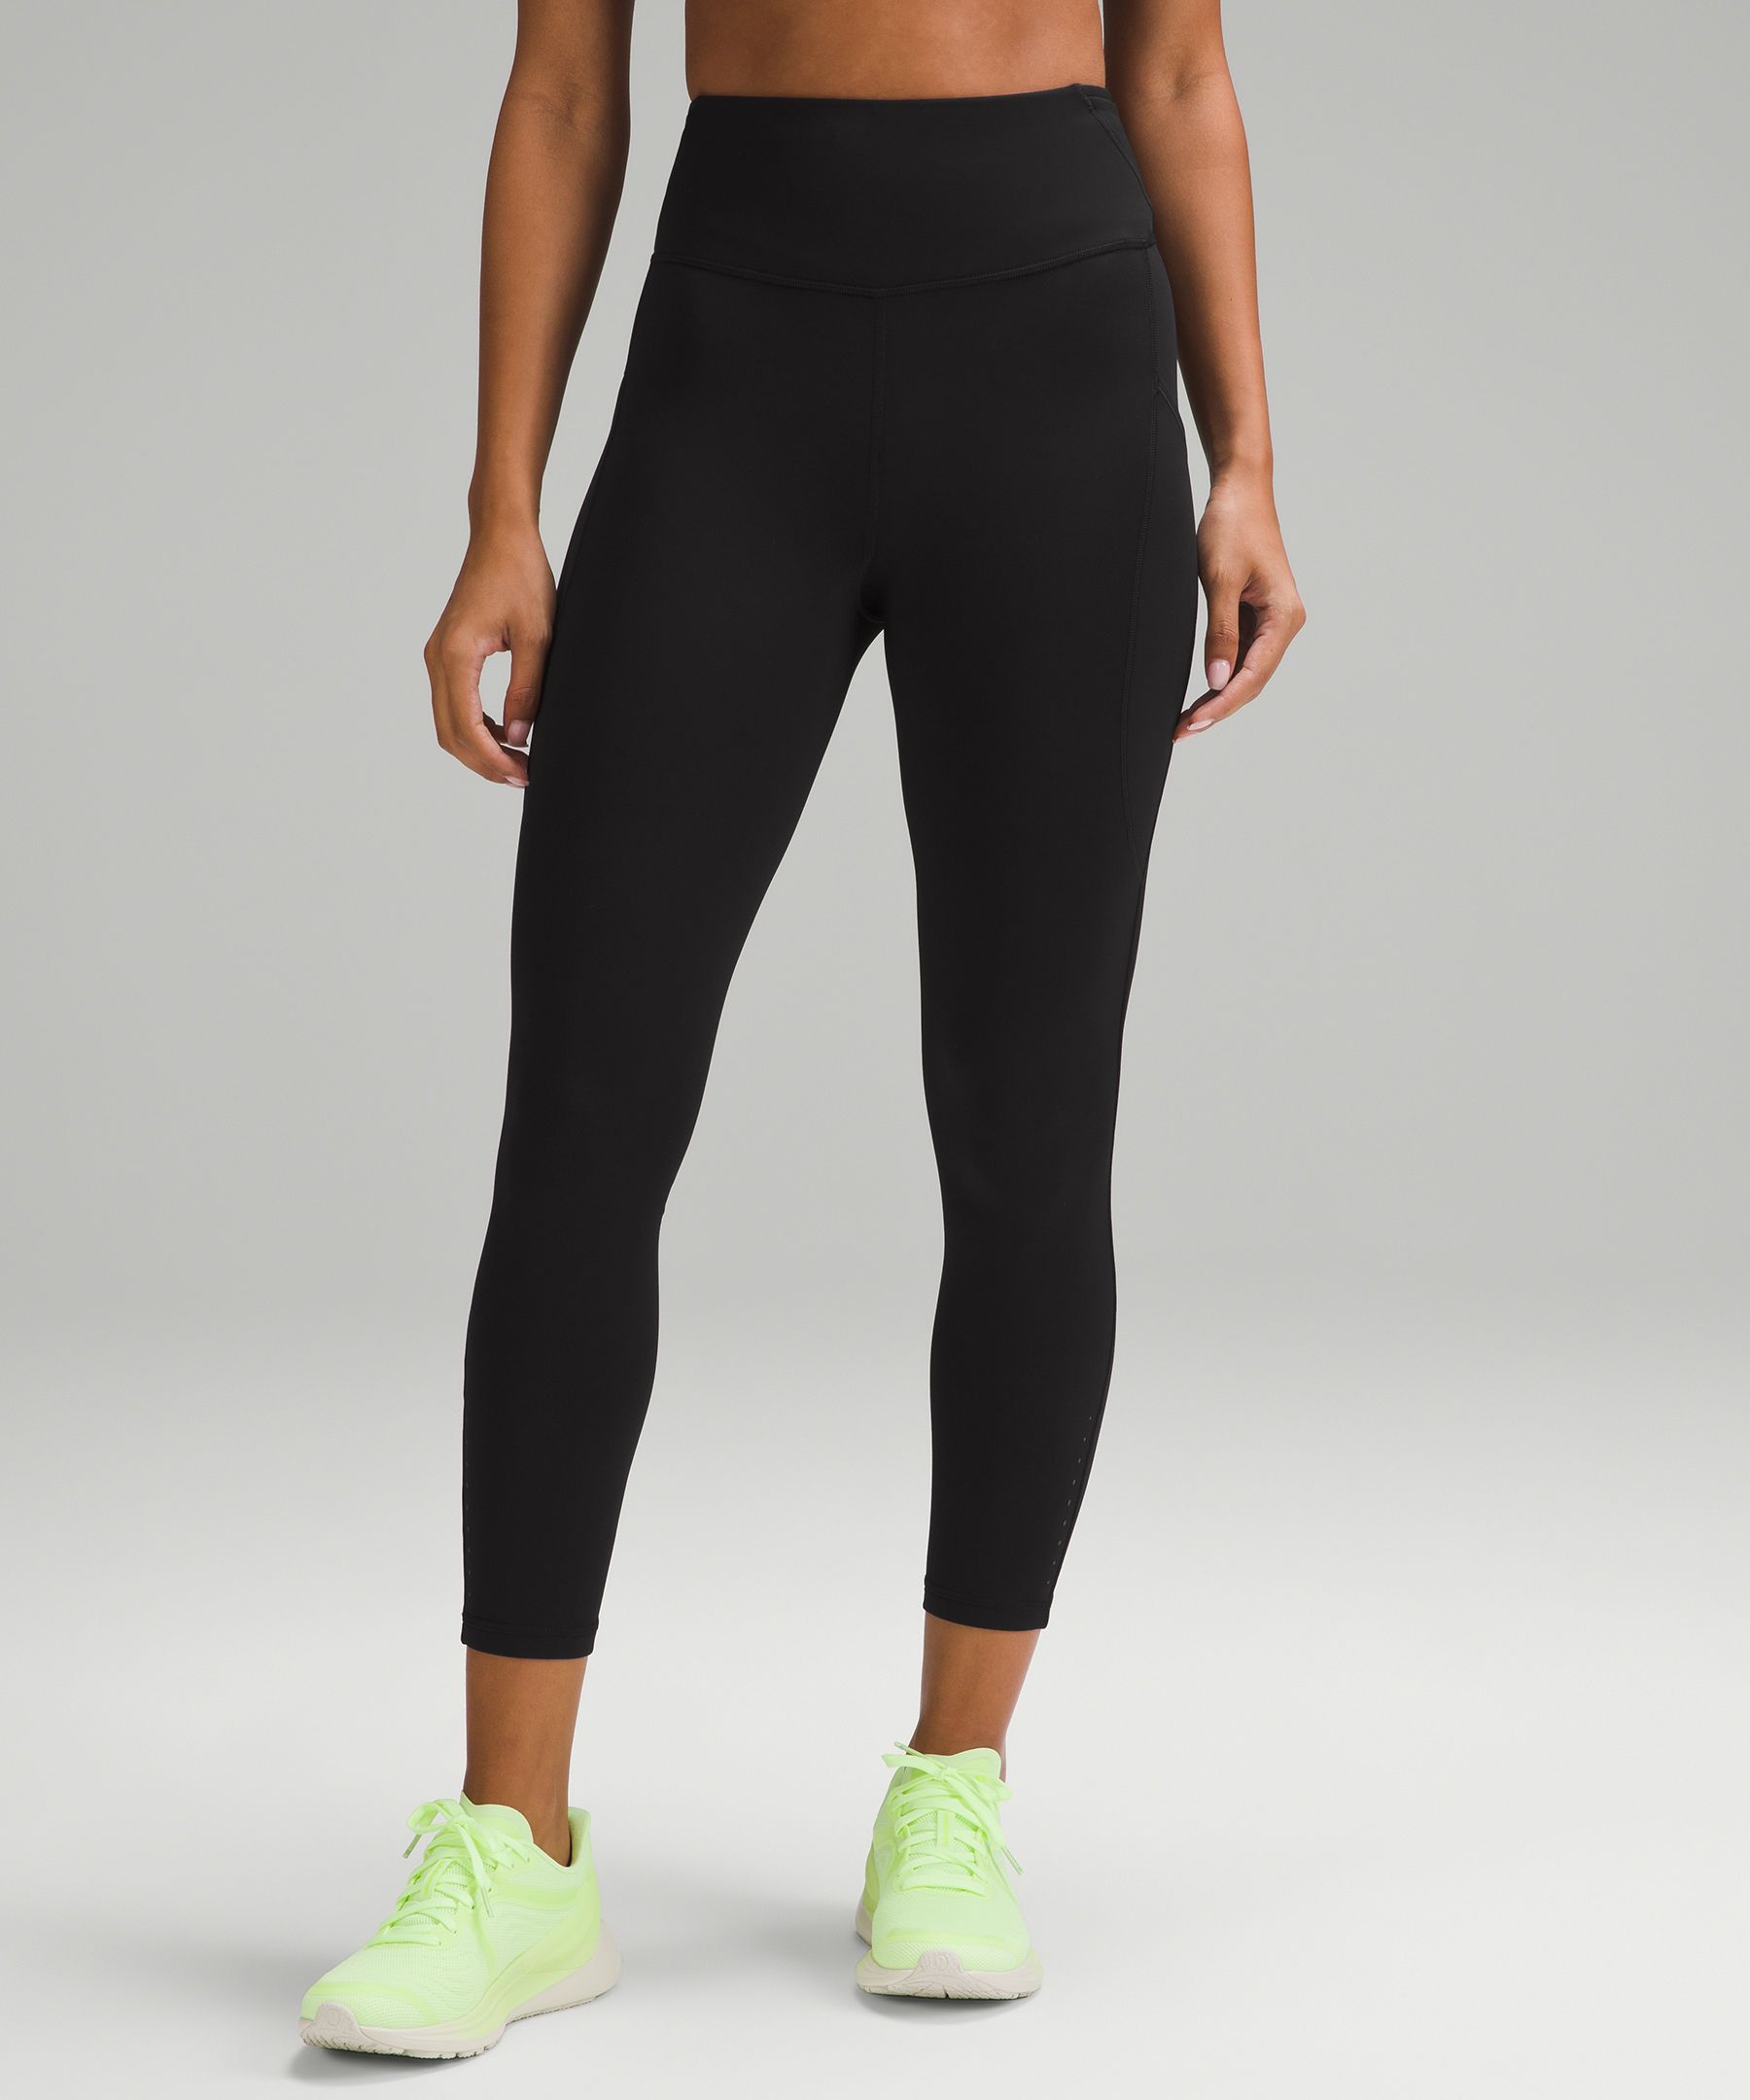 Lululemon Fast and Free High-Rise Fleece Tight 25